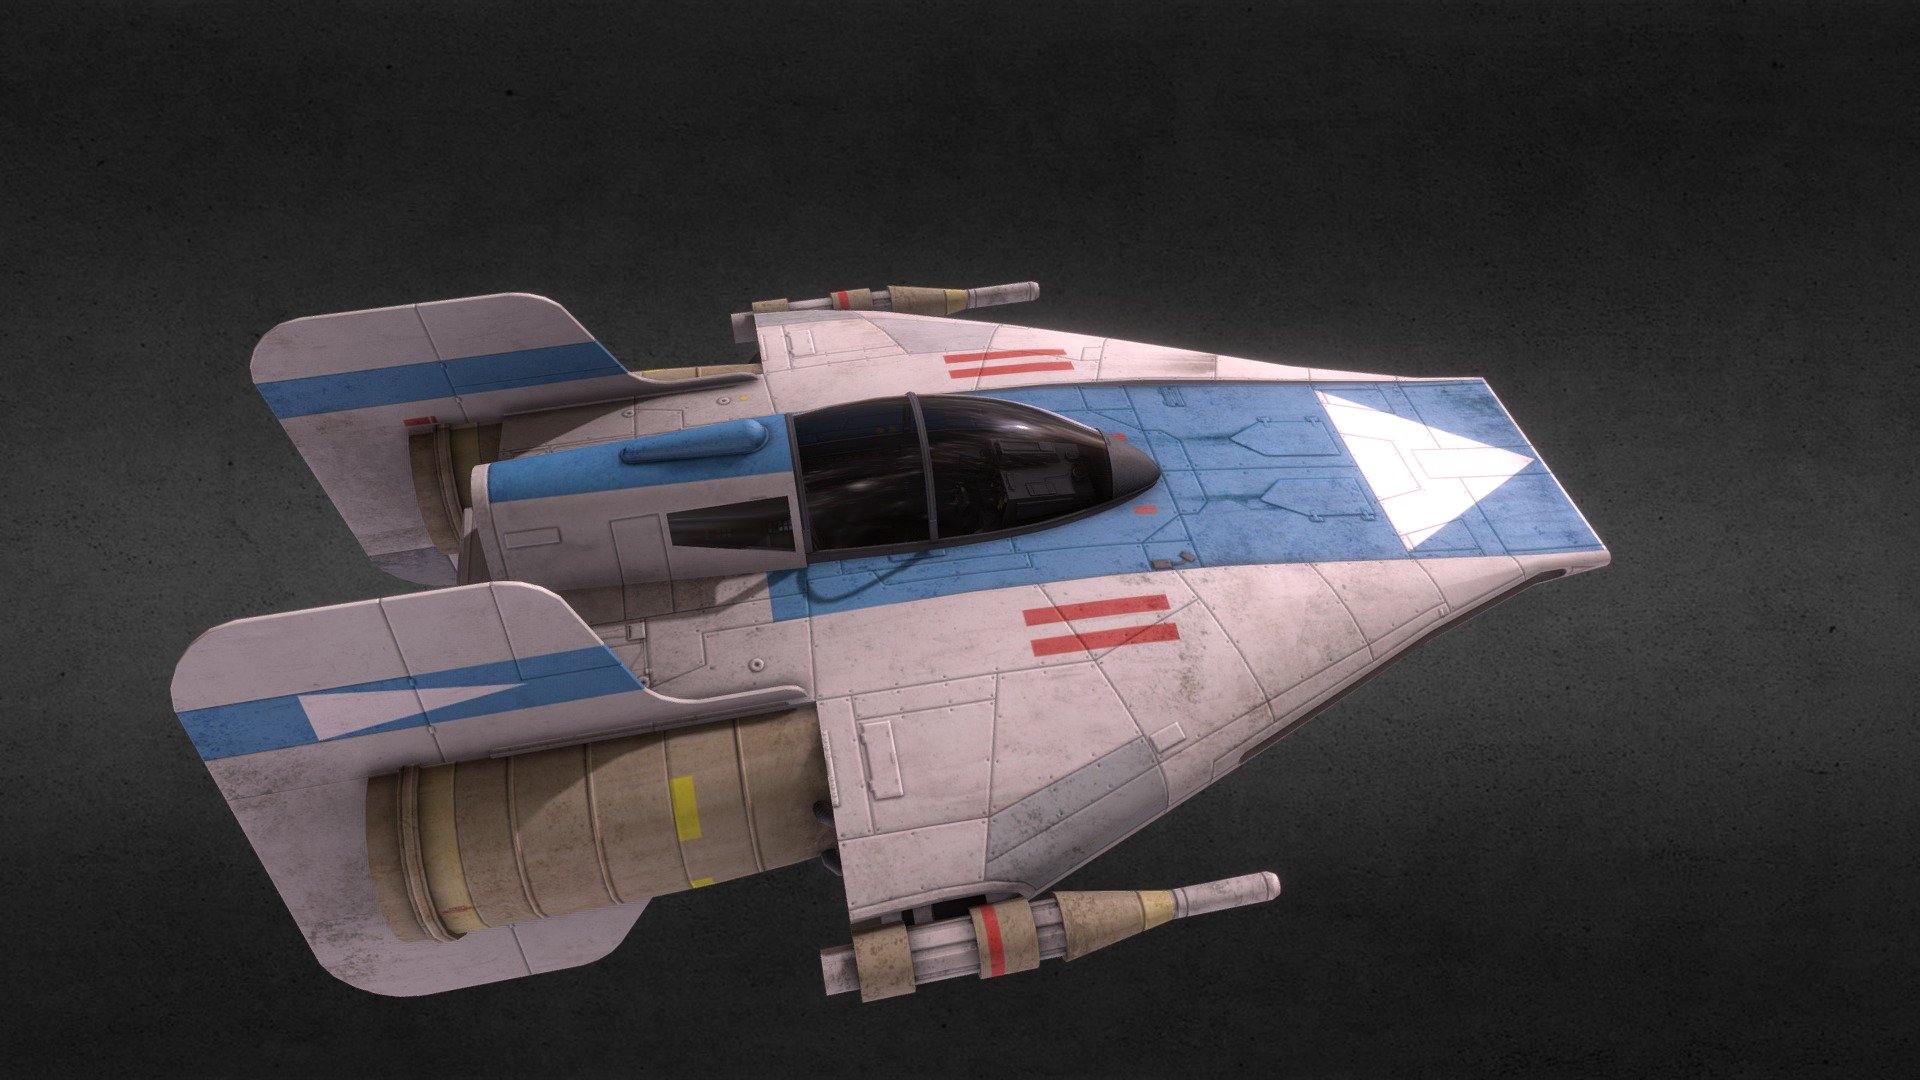 Rebels A-wing Starfighter